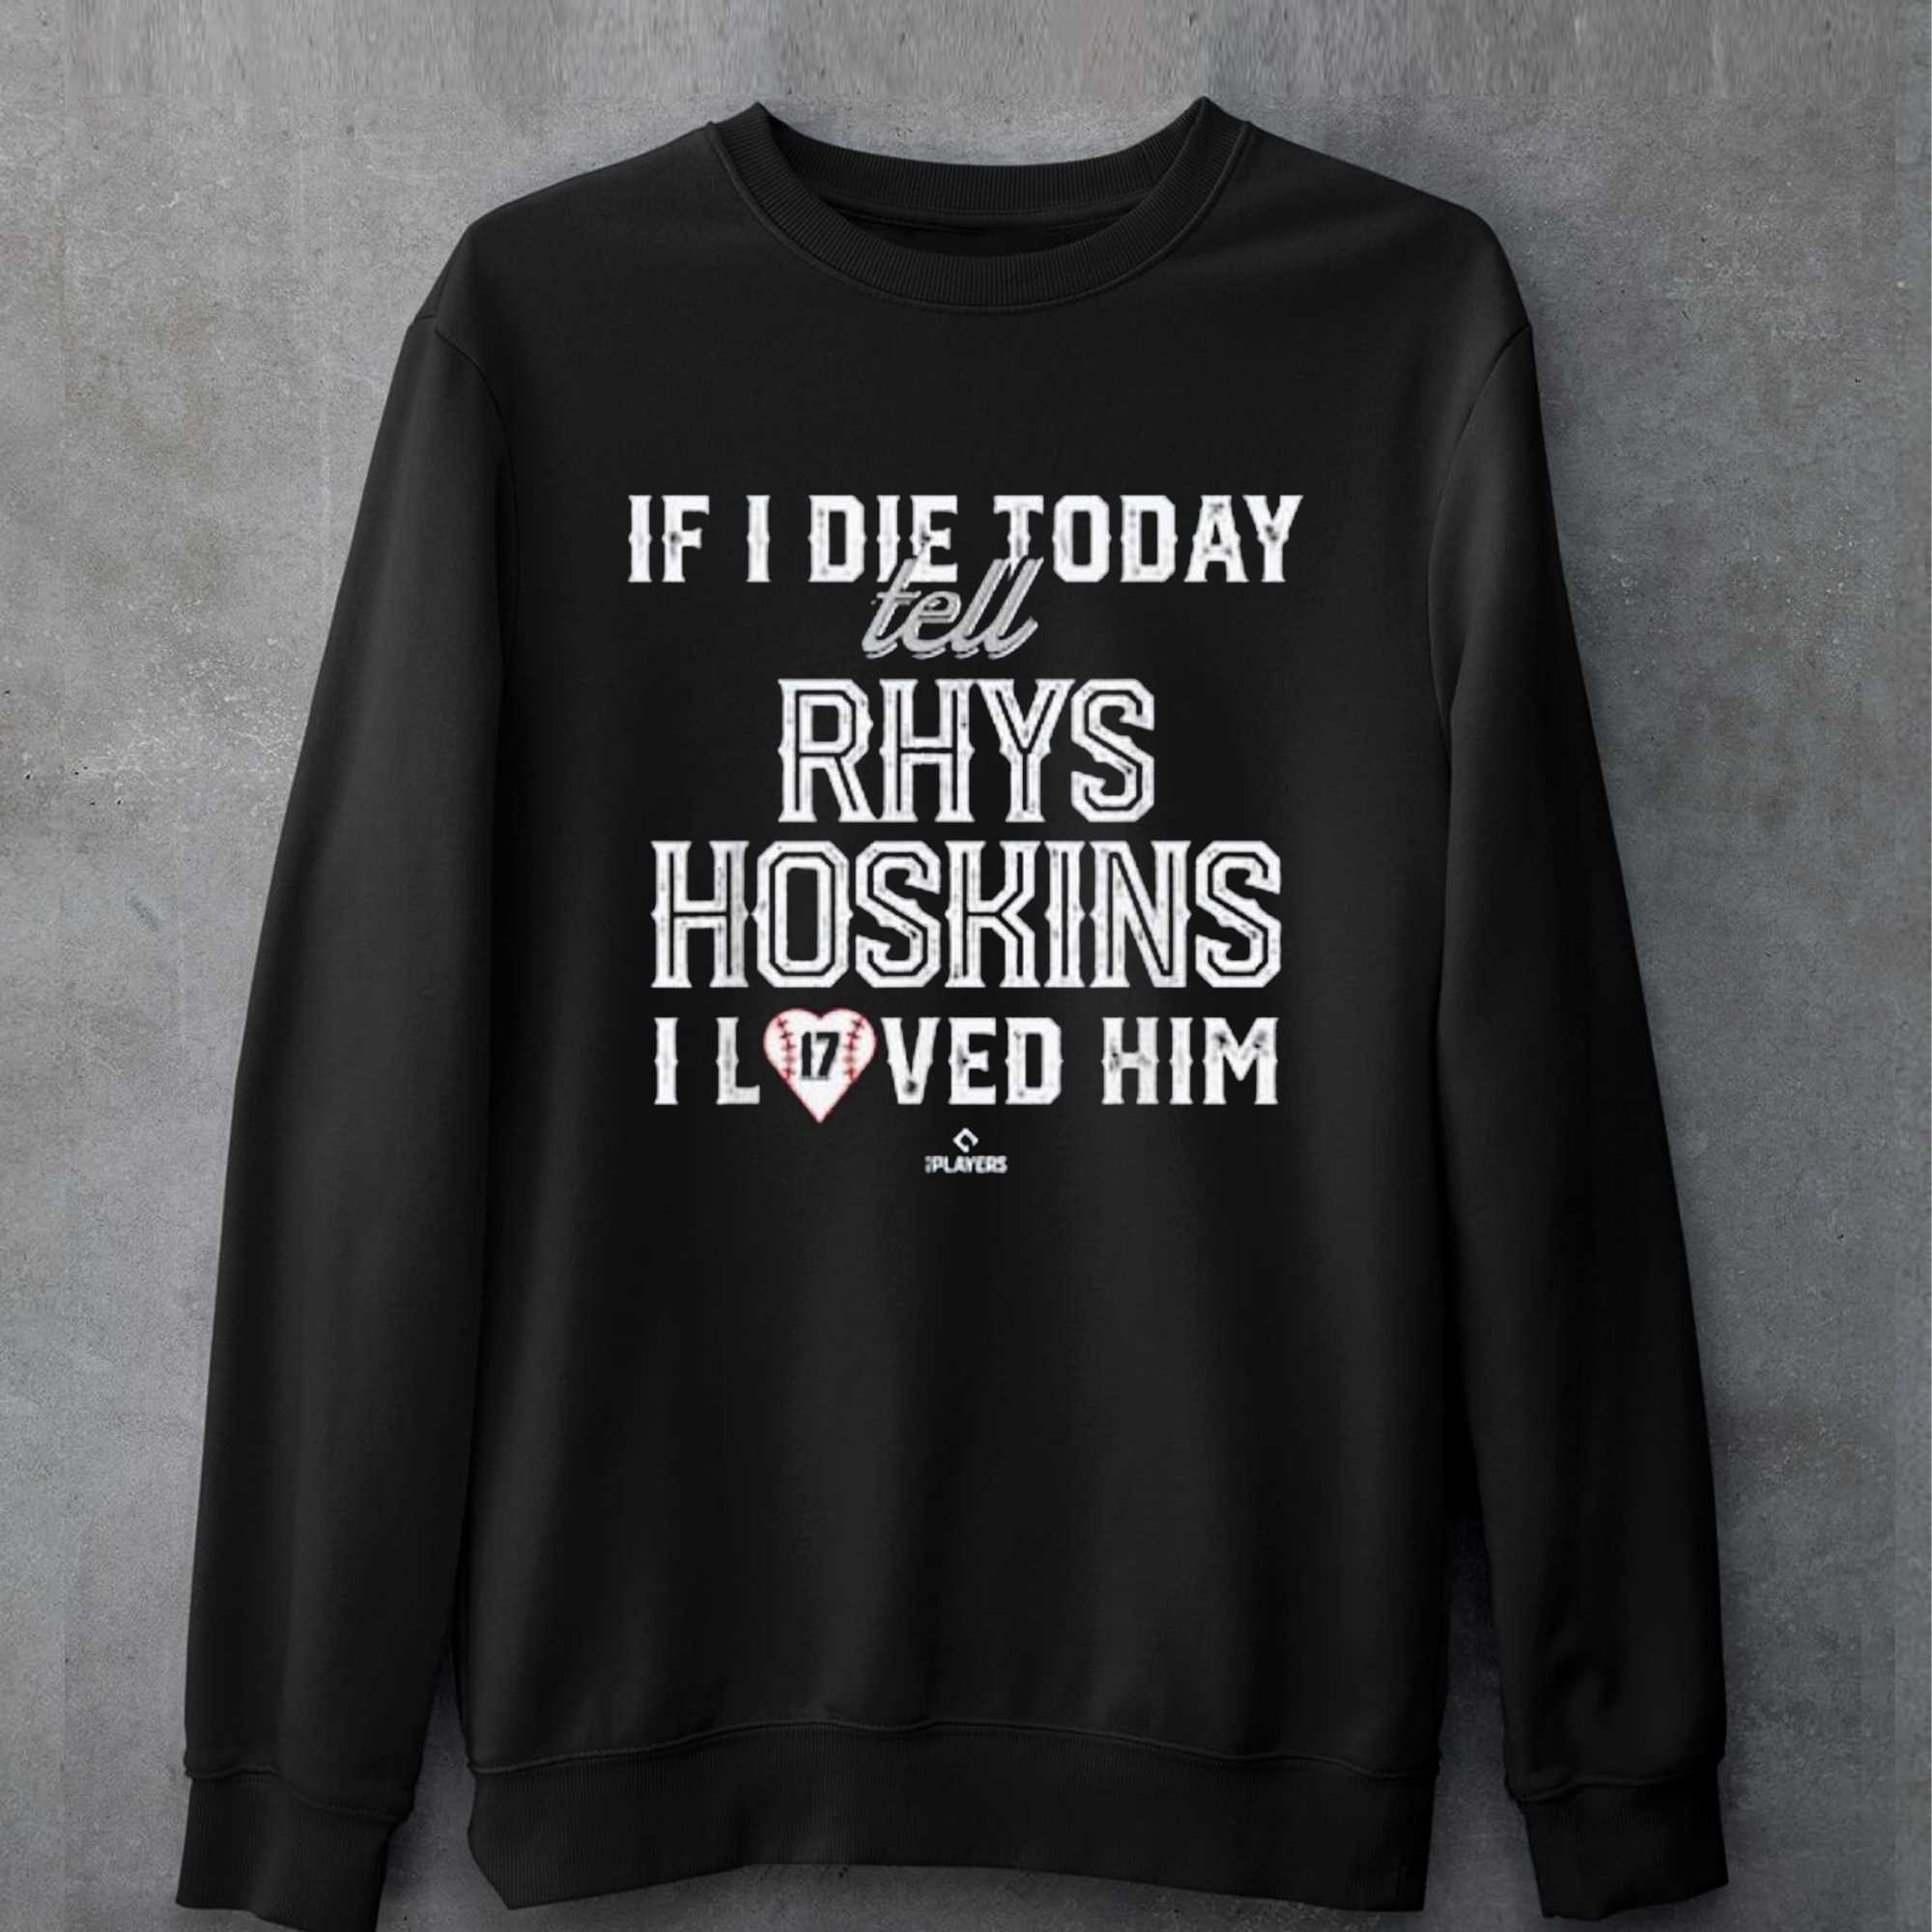 If I Die Today Tell Rhys Hoskins I Loved Him Shirt - Shibtee Clothing